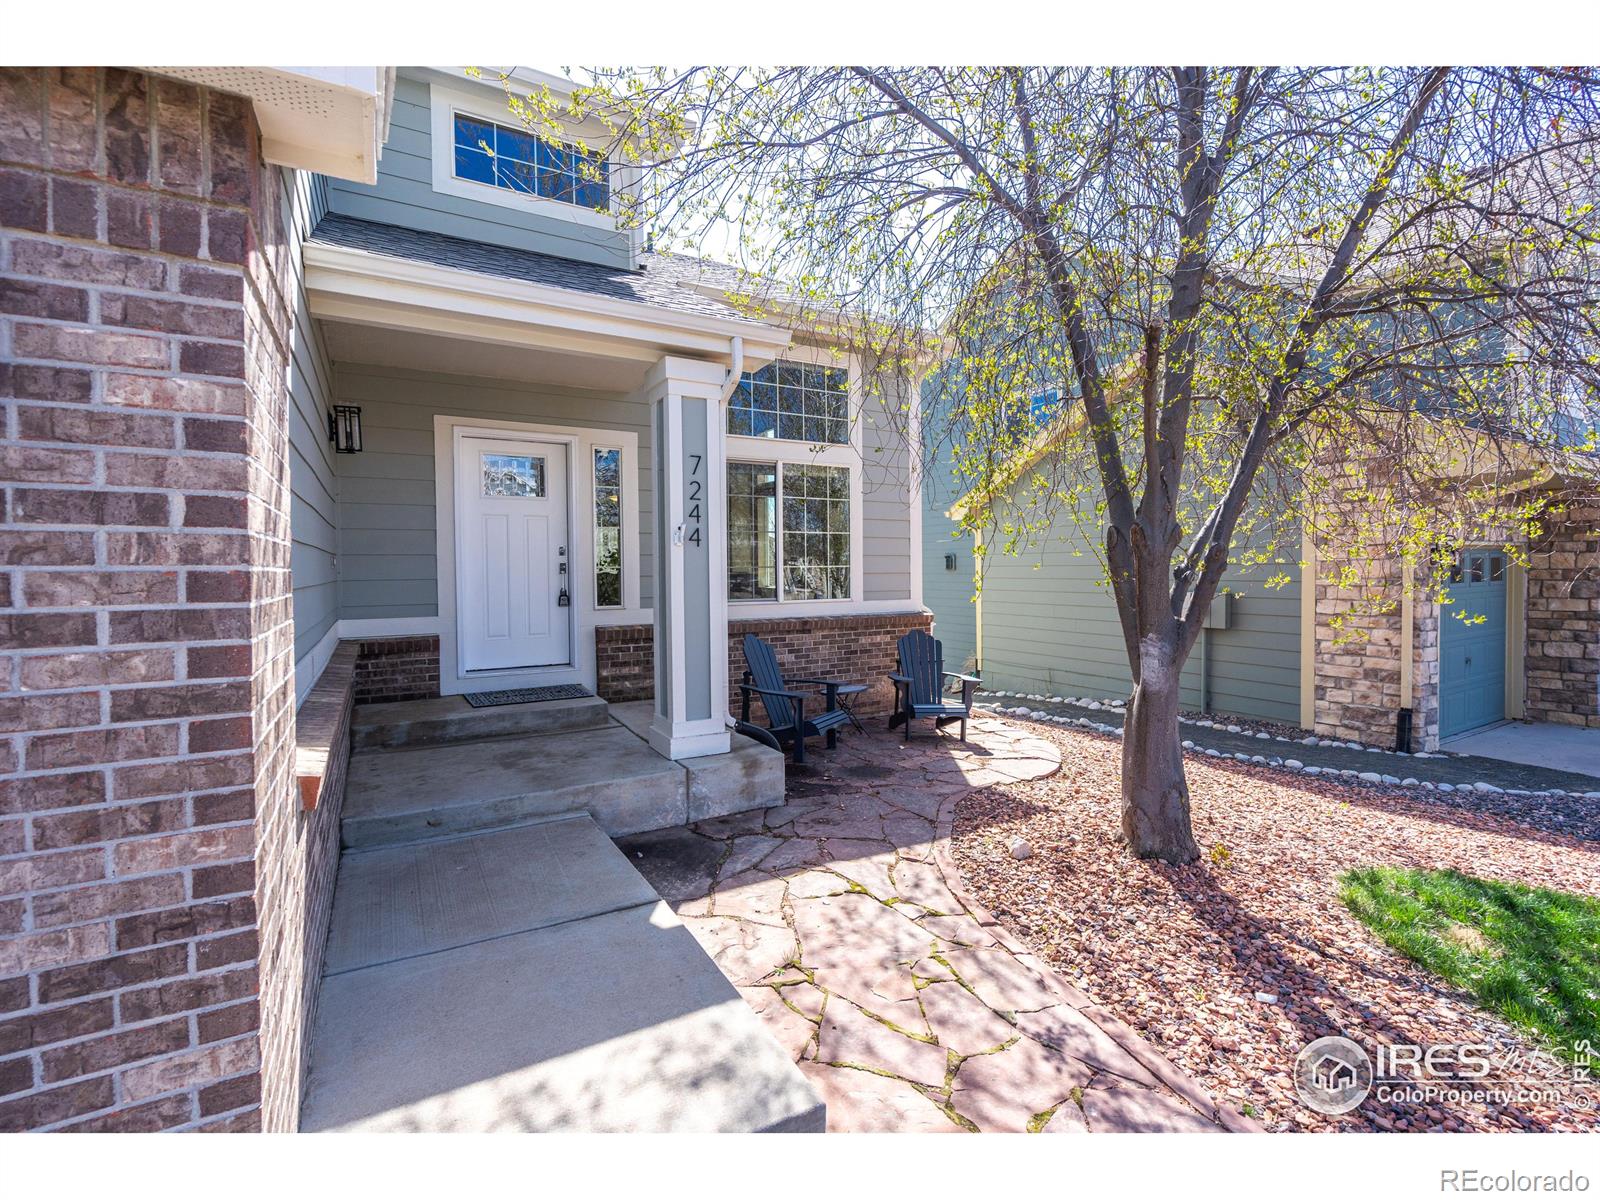 Report Image for 7244  Ranger Drive,Fort Collins, Colorado